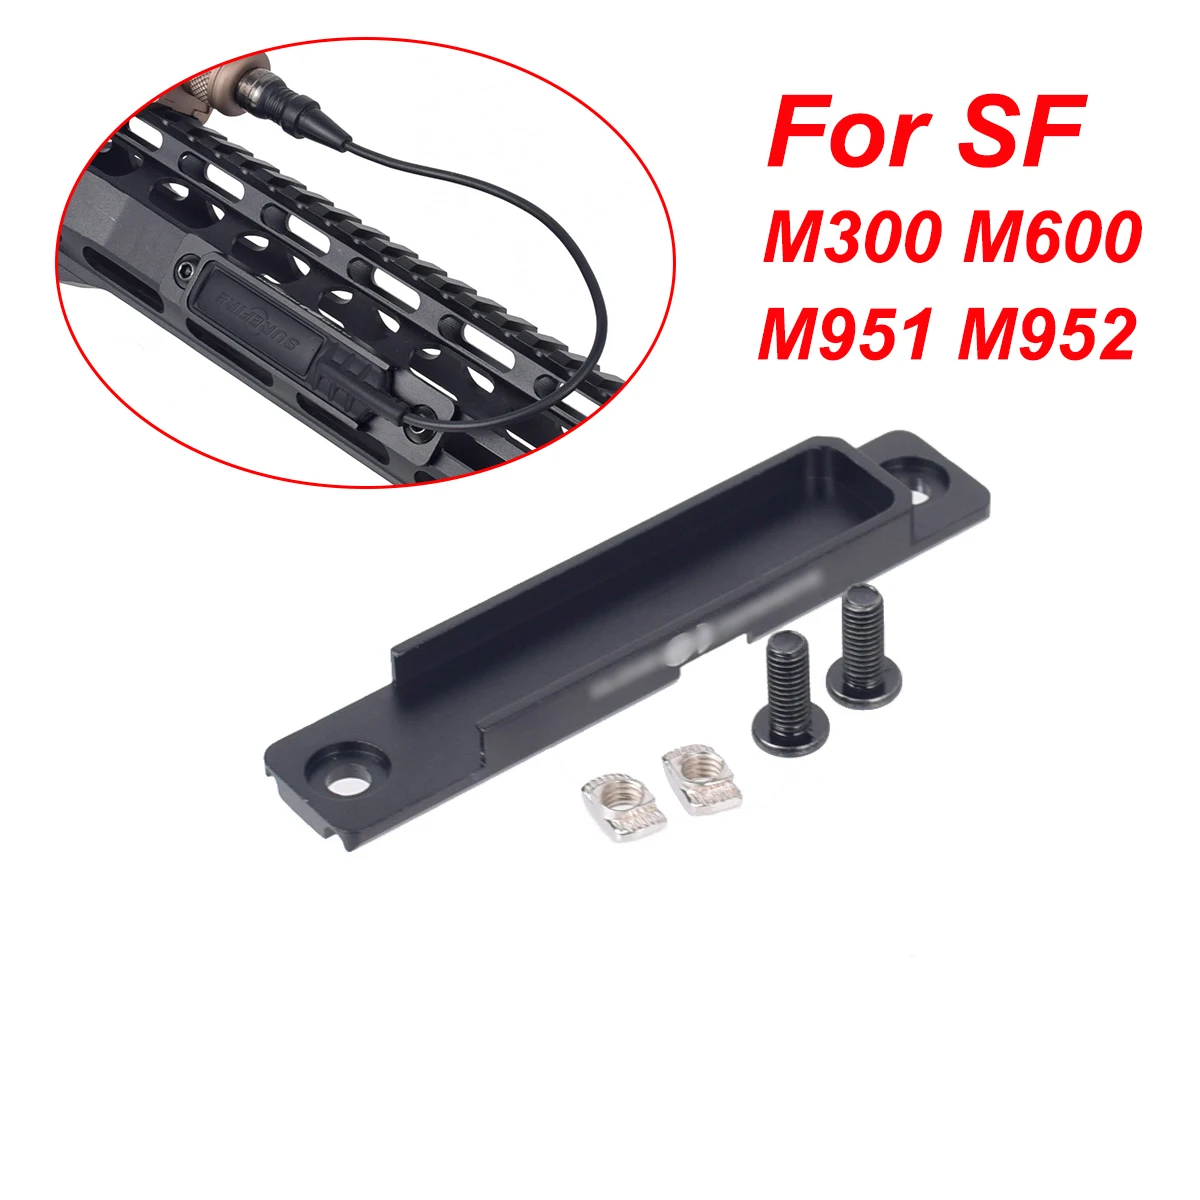 

Tactical Flashlight Rat Tail Slot Switch Guide For M300/M600/M951/M952 Remote Switch Fit Rifle M-LOK Handguard Hunting Accessory